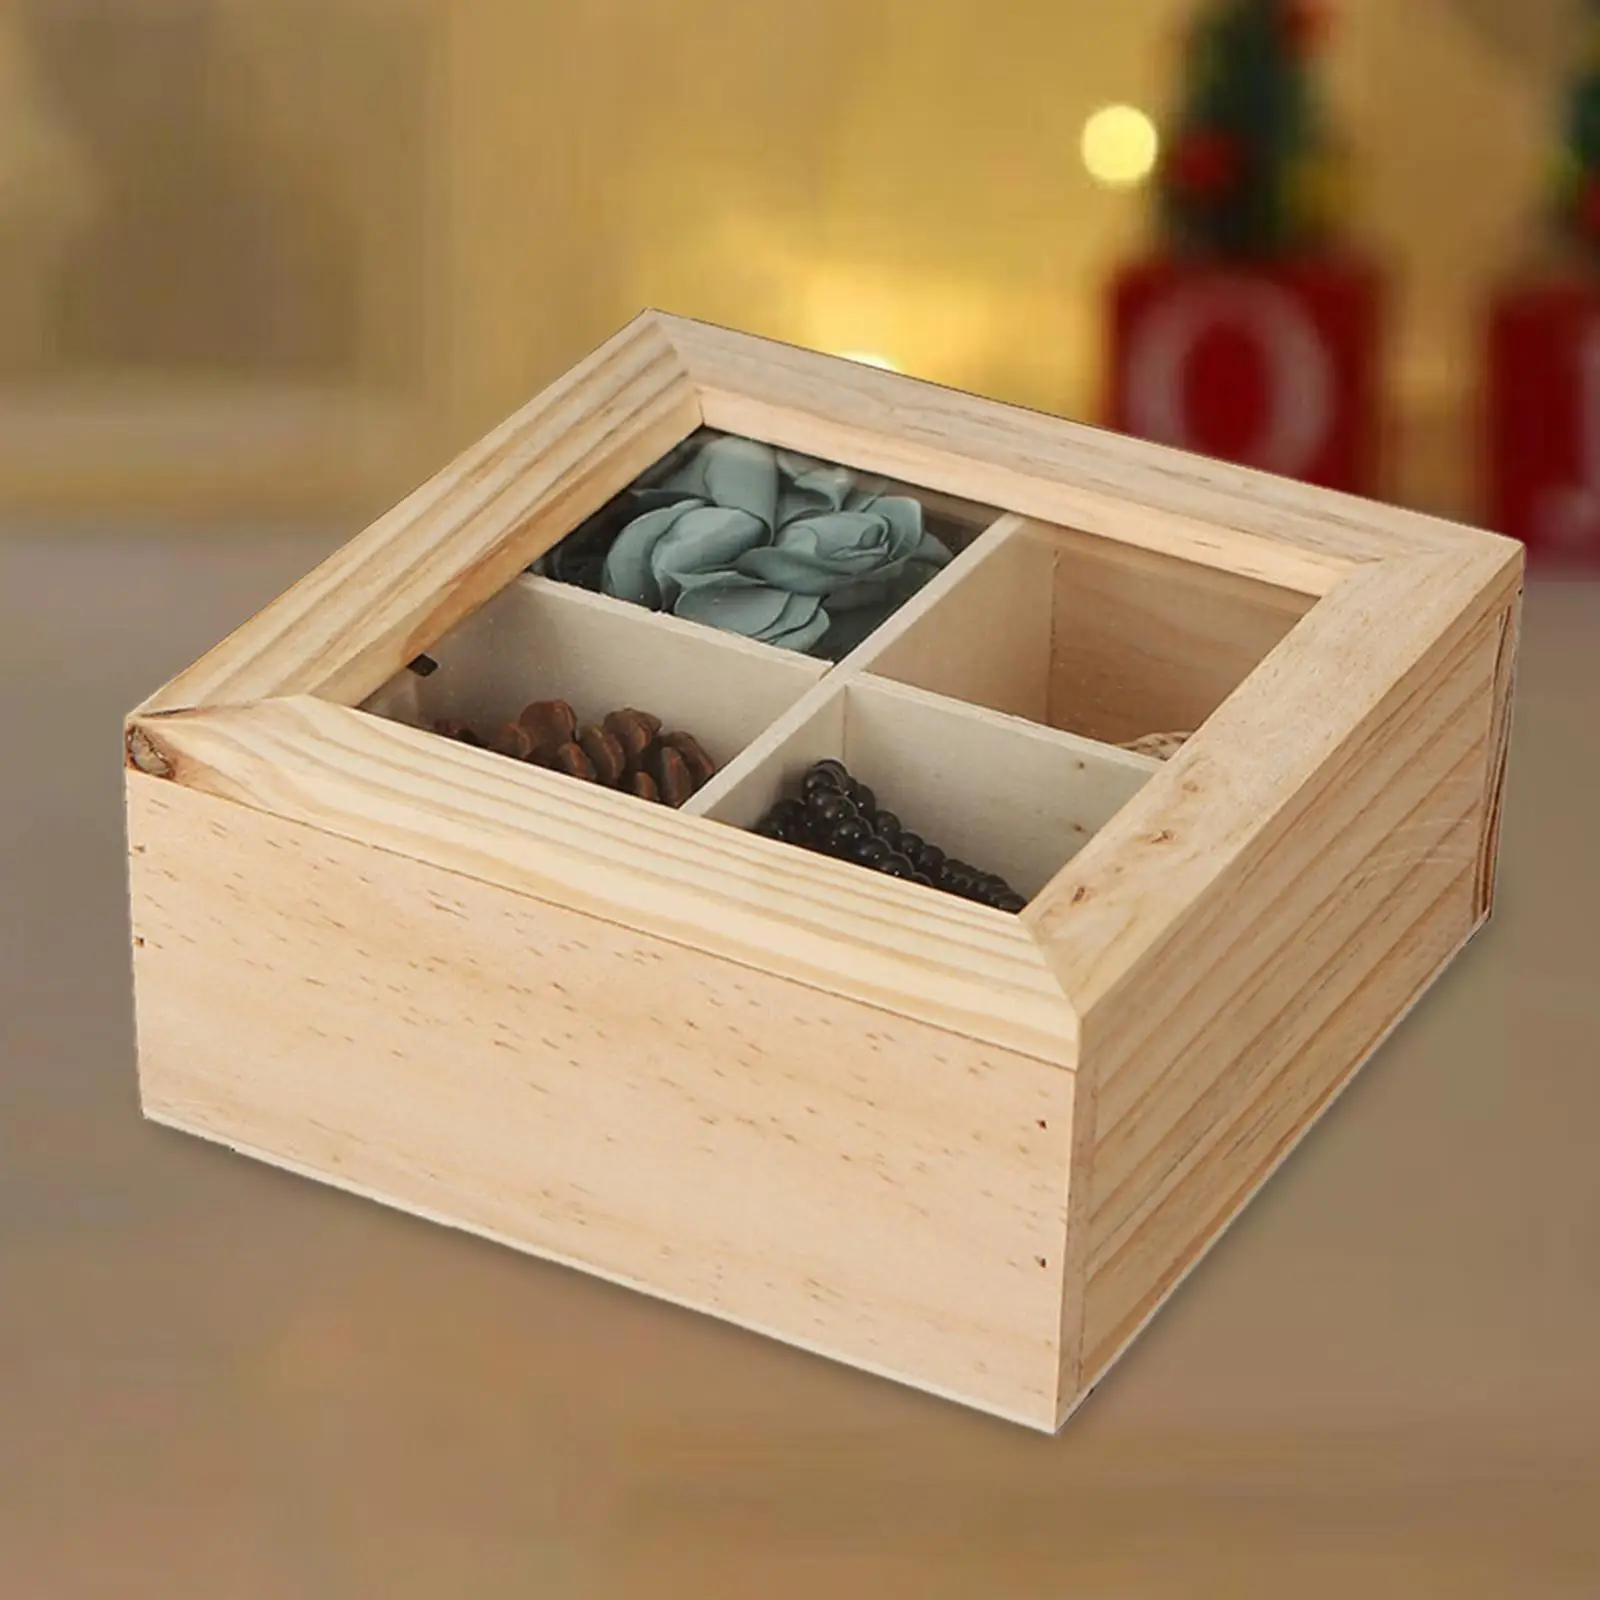 Wooden Storage Box Jewelry Display Case with Lid Home Decor Tea Box Organizer for Jewelry Bracelets Necklaces Earrings Crafts